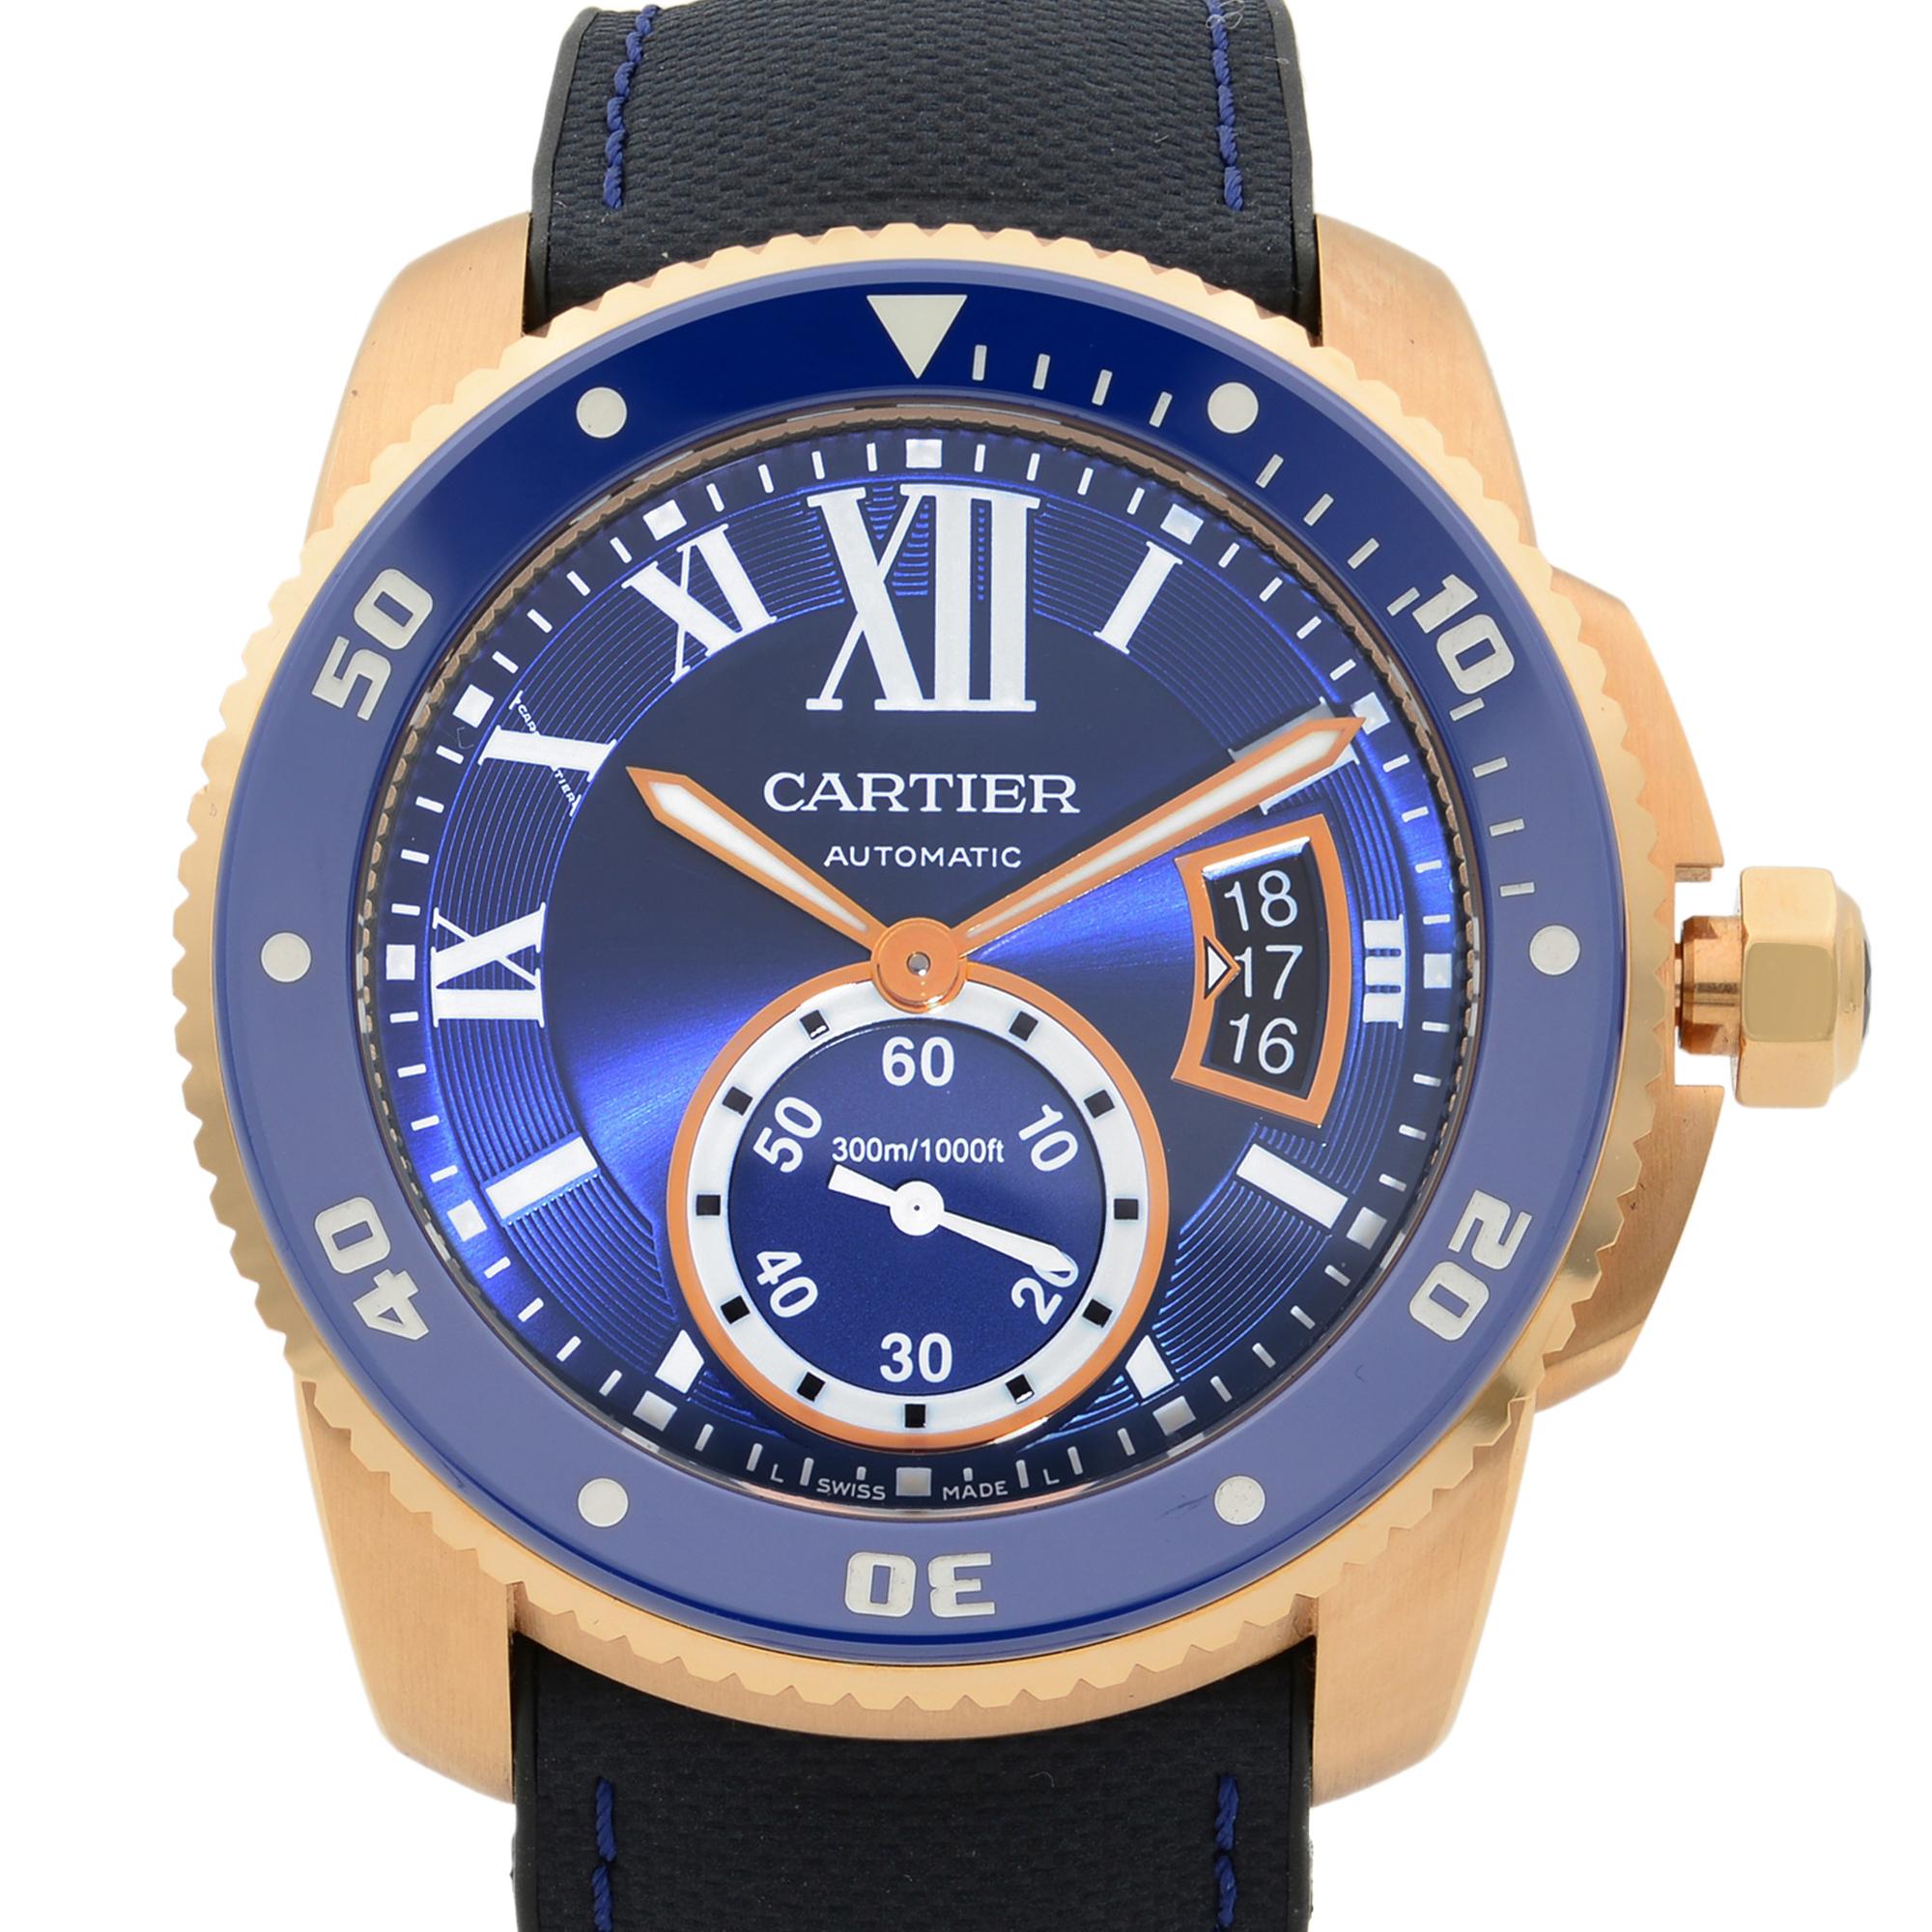 This display model Cartier Calibre de Cartier Diver WGCA0009 is a beautiful men's timepiece that is powered by mechanical (automatic) movement which is cased in a rose gold case. It has a round shape face, date indicator, small seconds subdial dial